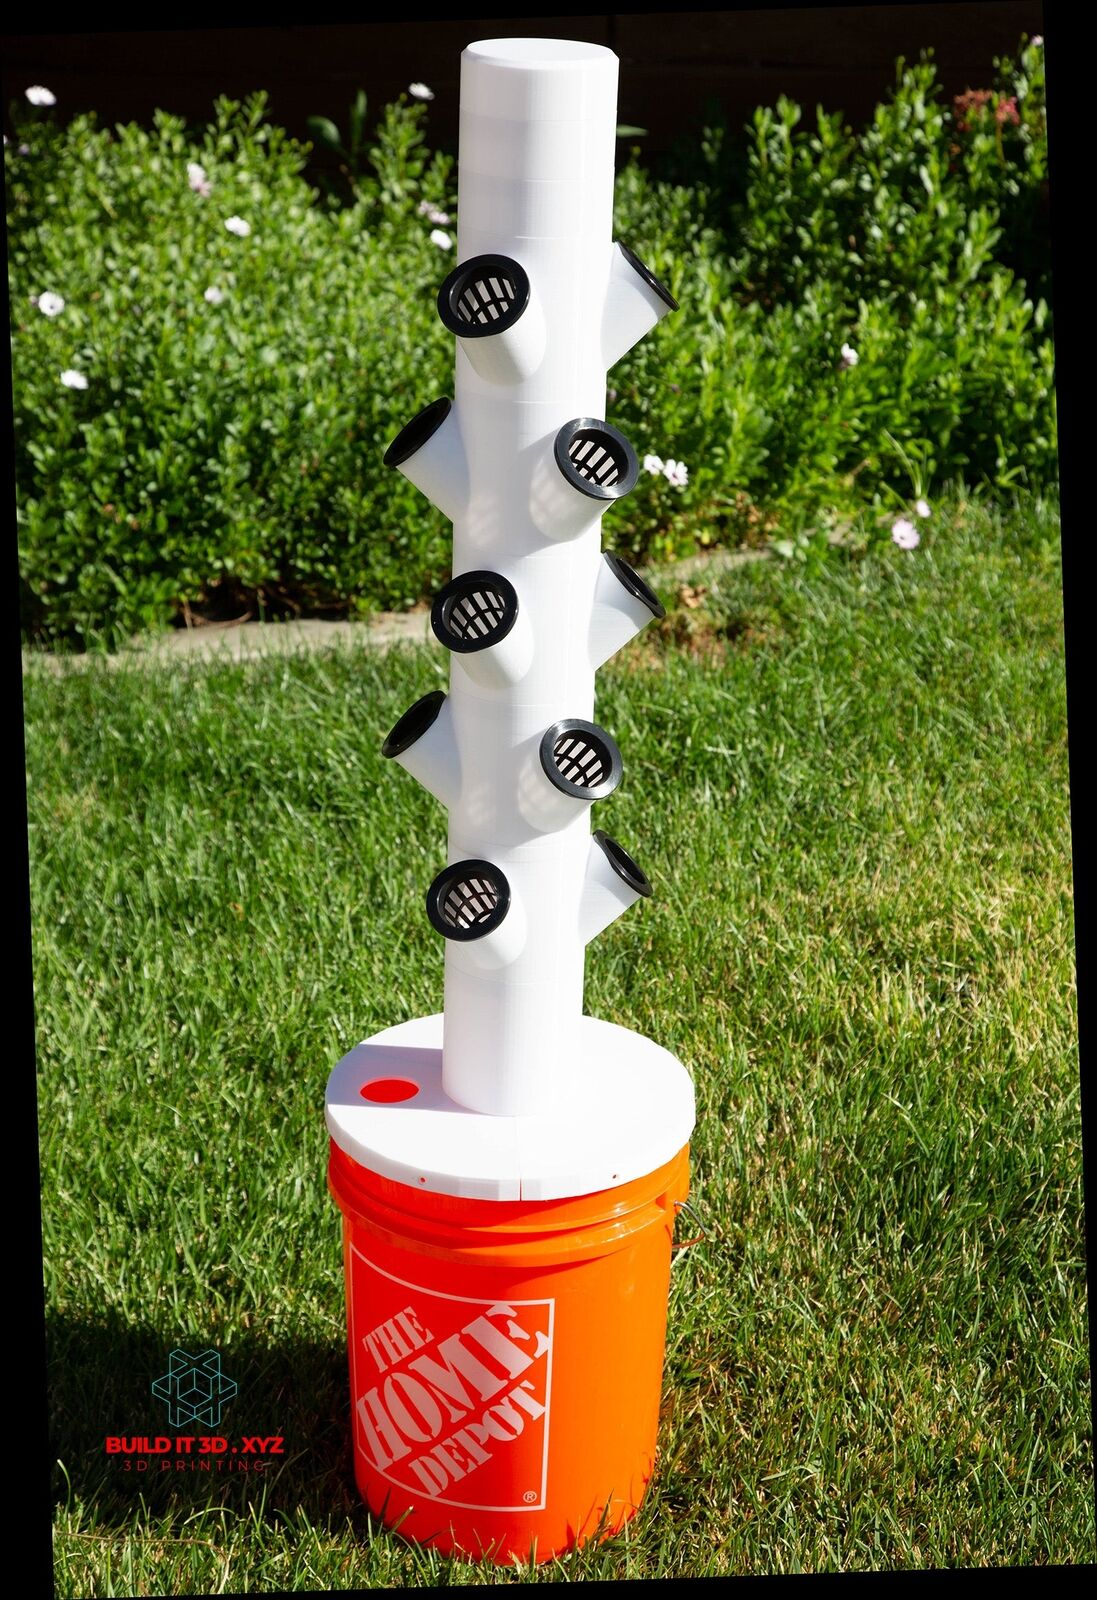 Complete Hydroponic tower - 2-way for 10 cups. Complete hydroponic tower.